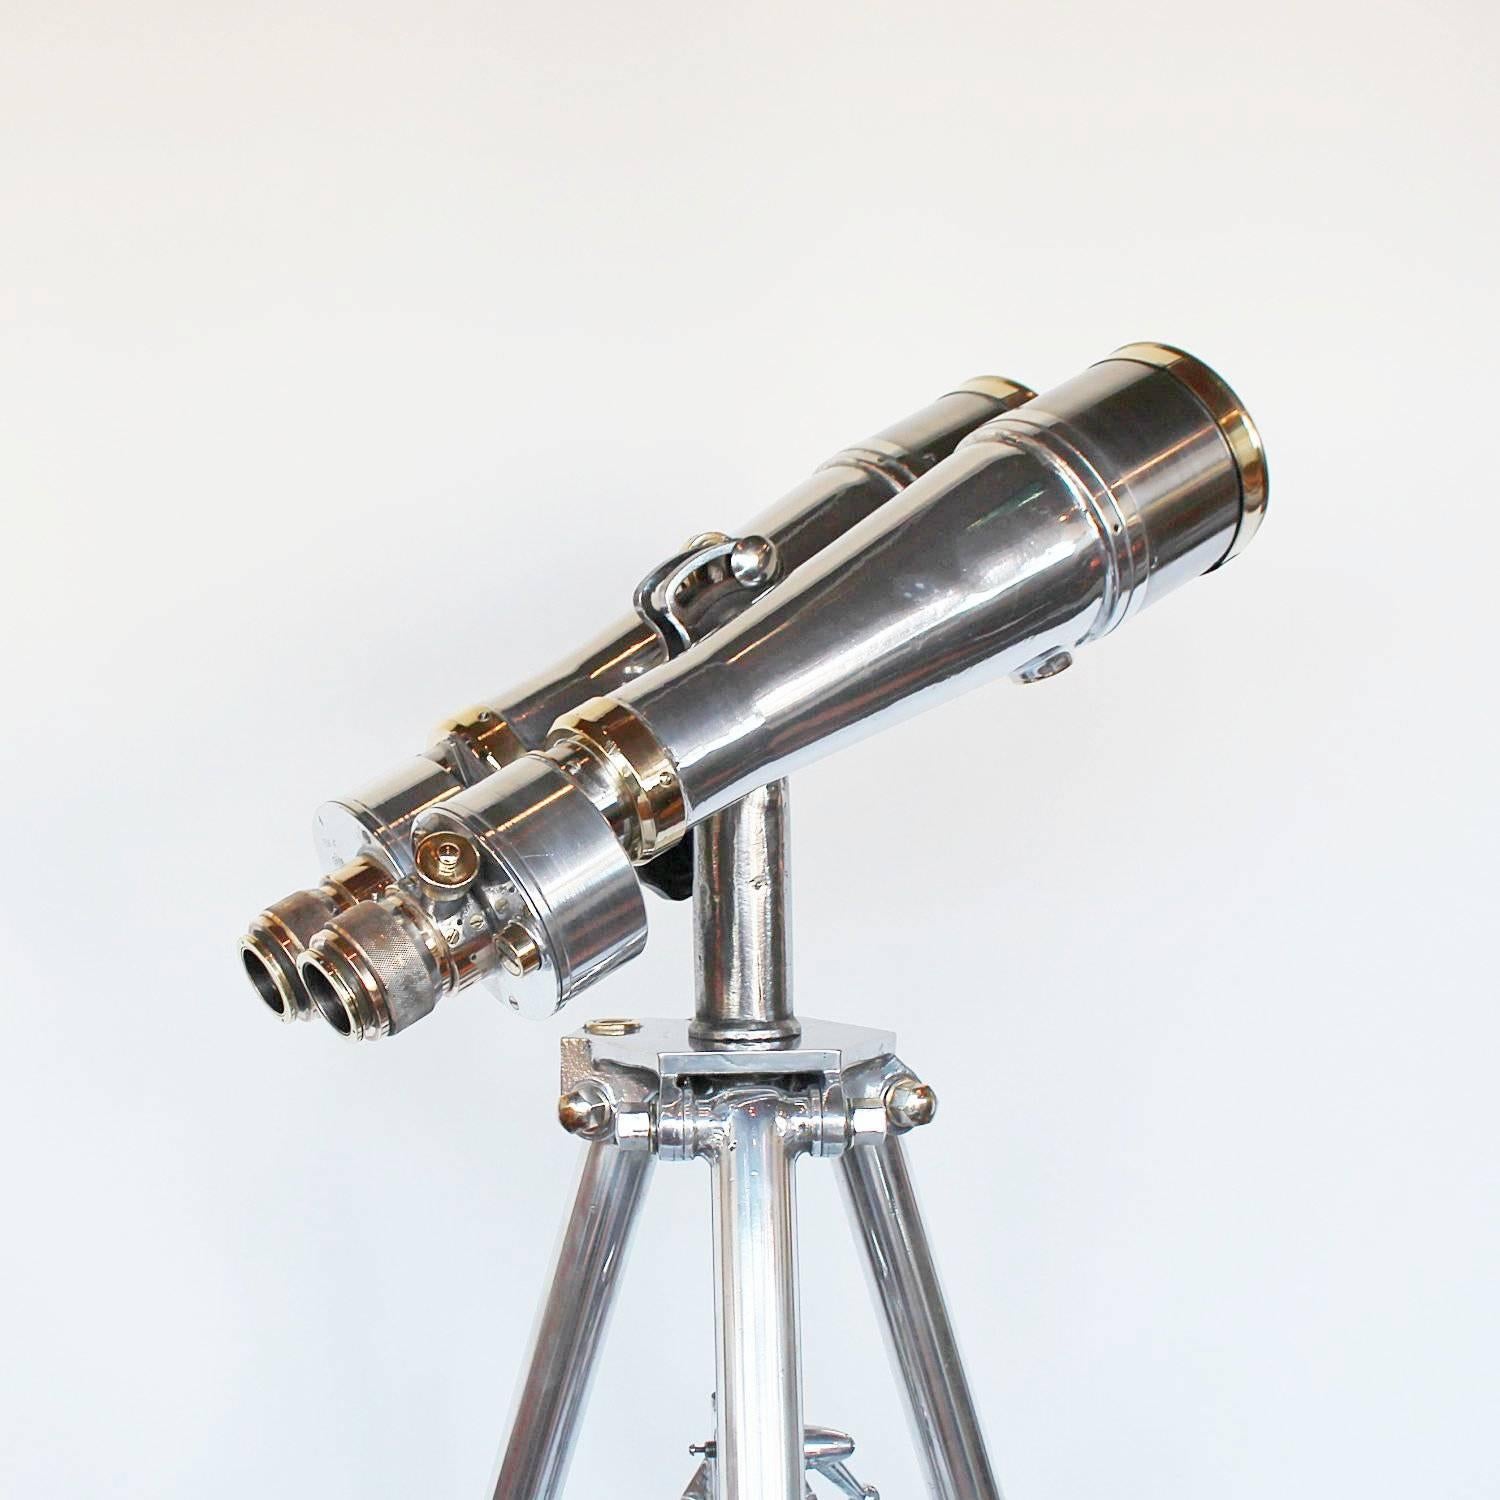 A pair of Fuji Meibo marine binoculars. 15x magnification.

DIMENSIONS: Height with stand 1-2metres , barrel L 35 cm, total L 47cm, W 22 cm

Set over an adjustable, polished metal tripod stand with integral ball and socket foot pads. With original